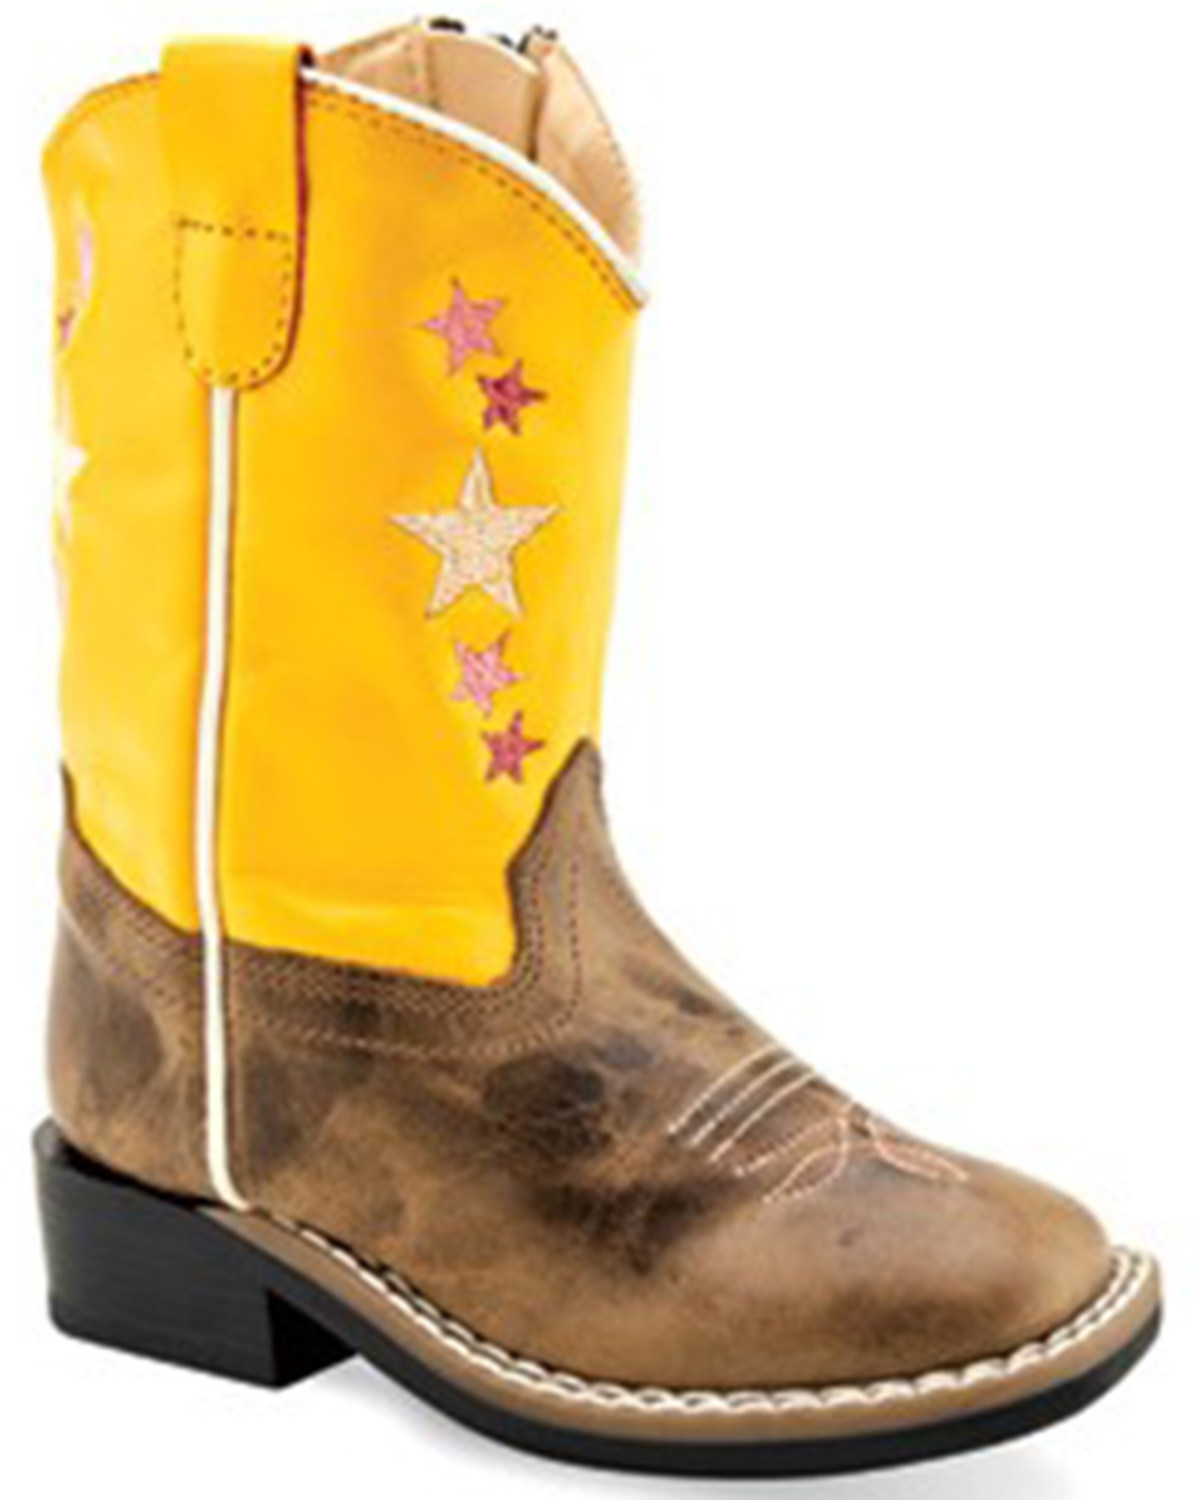 Old West Toddler Girls' Cactus Western Boots - Broad Square Toe